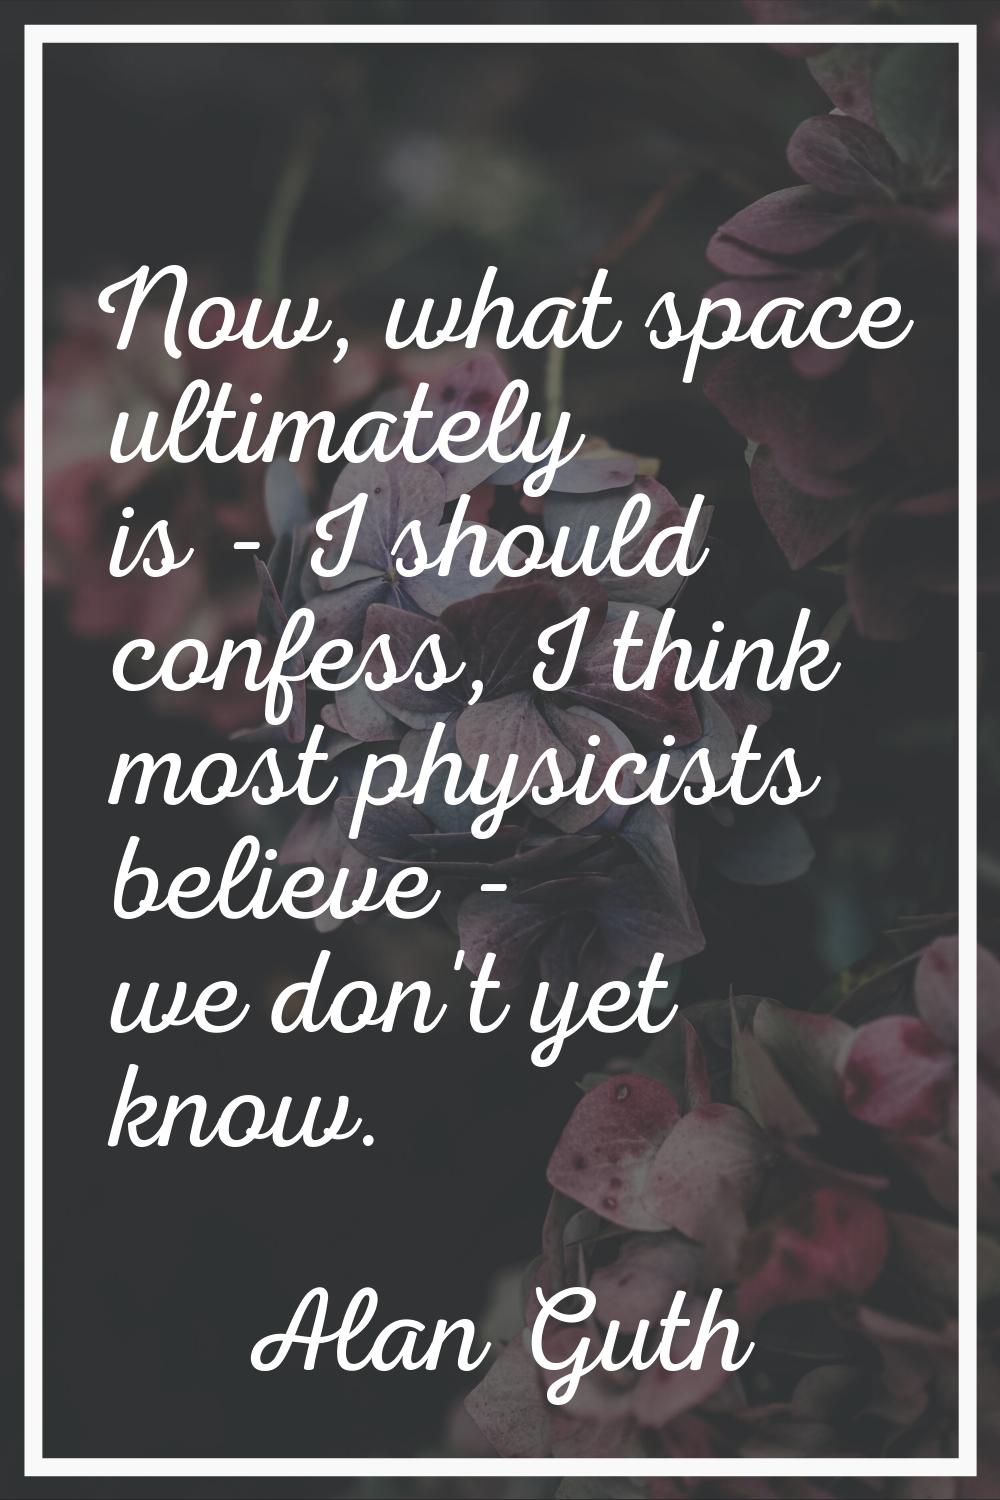 Now, what space ultimately is - I should confess, I think most physicists believe - we don't yet kn